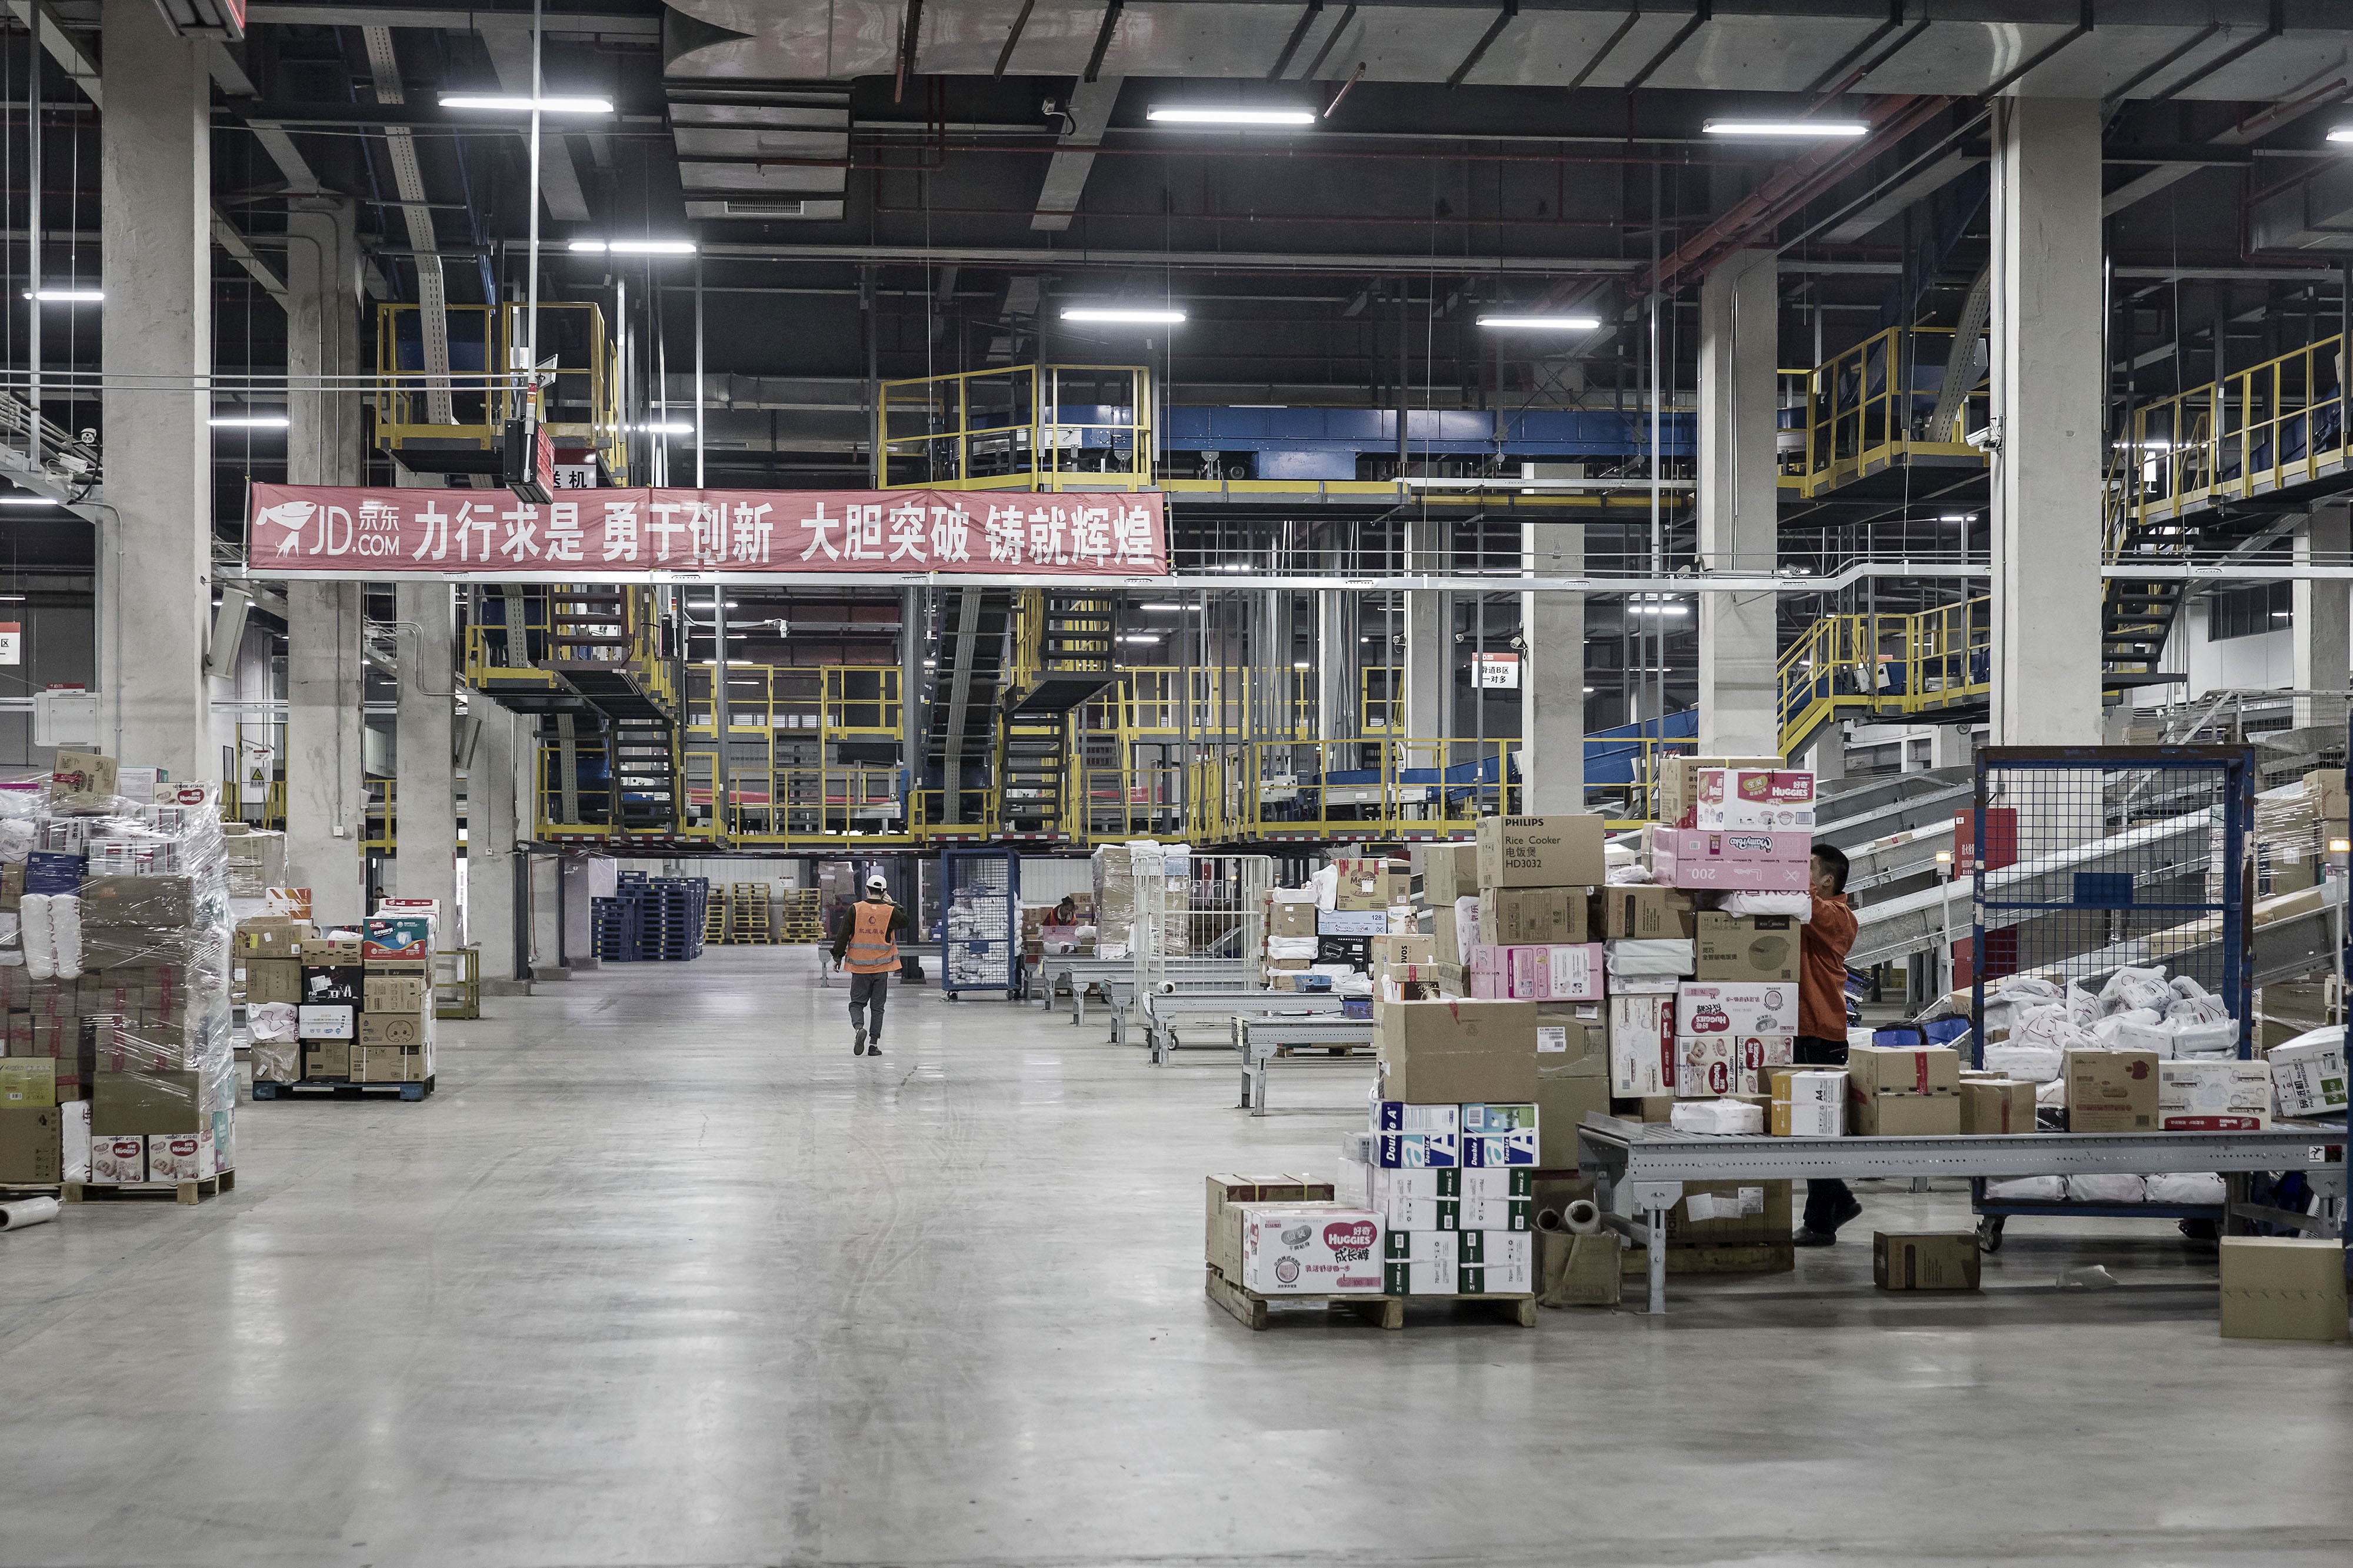 Several China Logistics executives have said that ESR’s entreaty for a boardroom seat is ‘not an option’ because they compete for the same customers